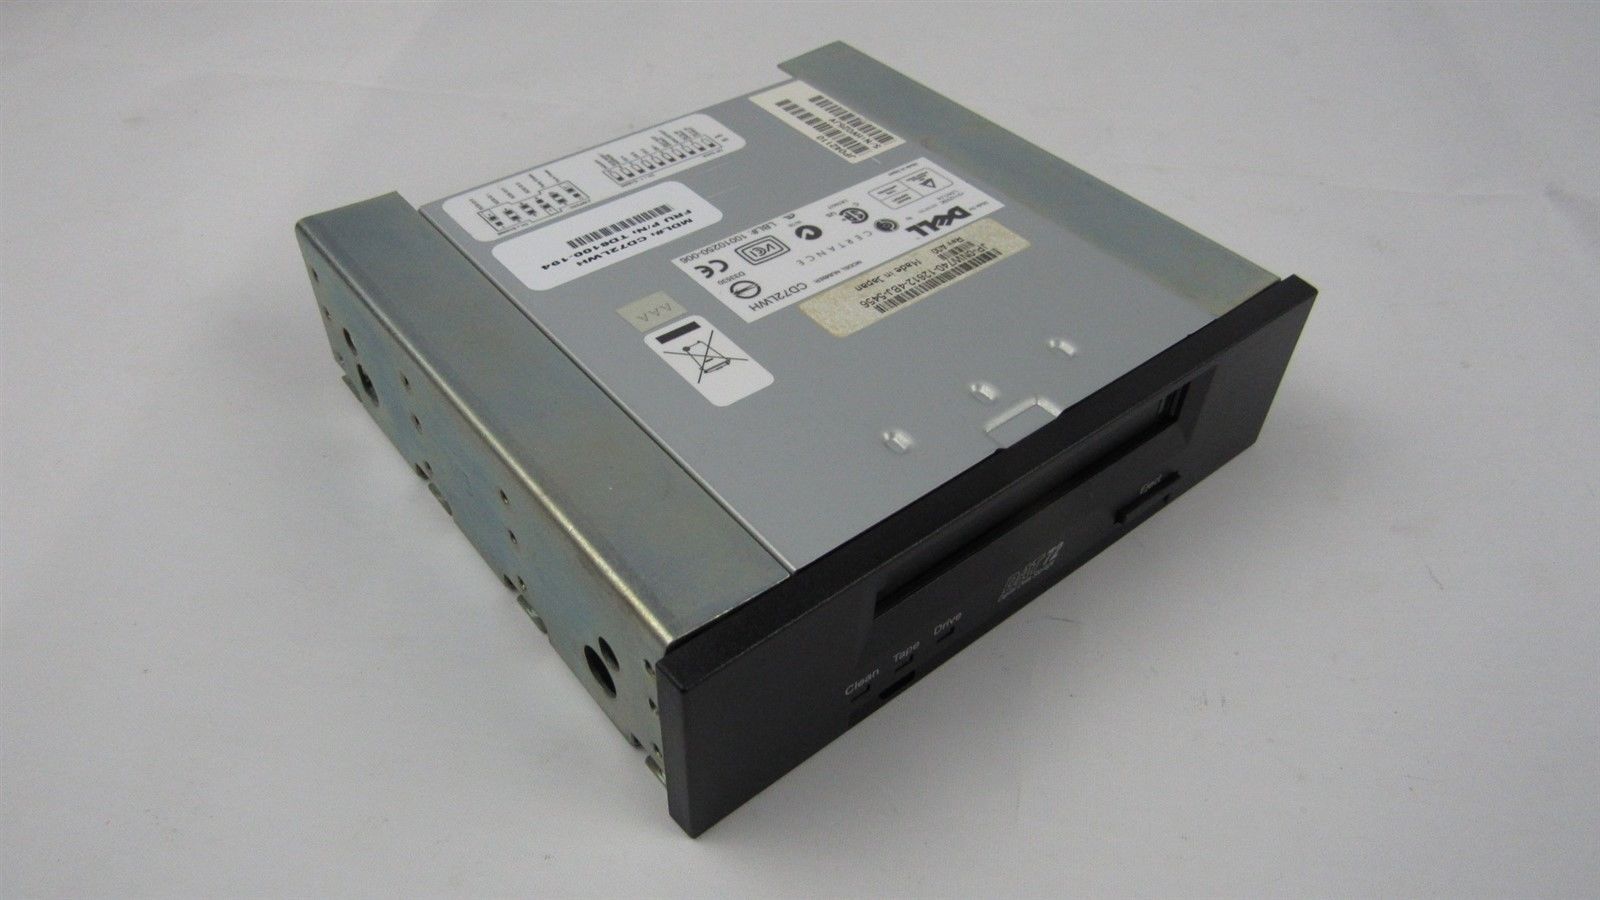 Dell Quantum SCSI LVD Internal Tape Drive CD72LWH TD6100-194 NW740 0NW740